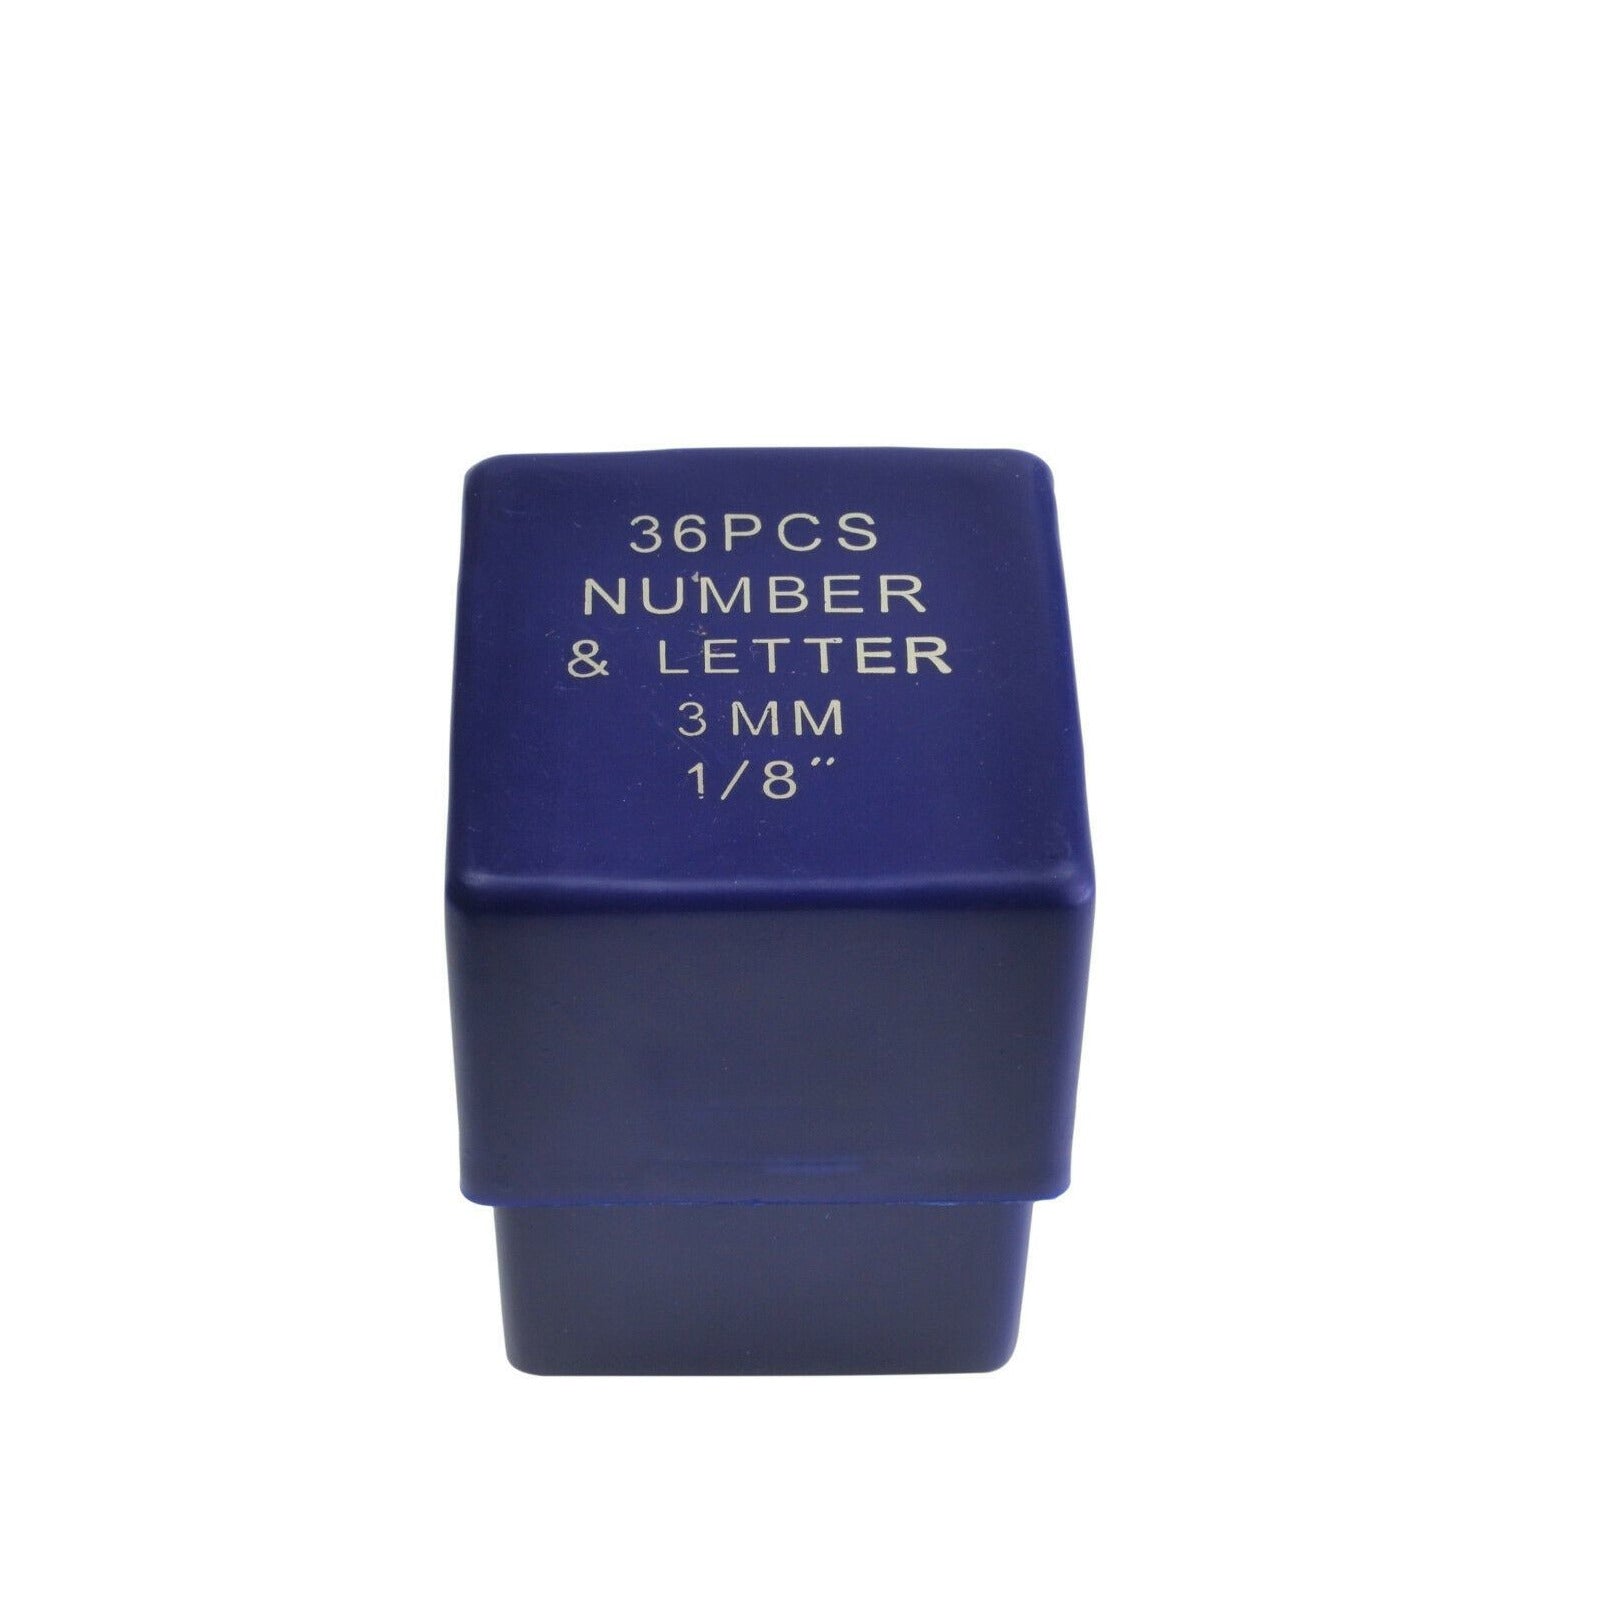 36pc x 3 mm or 1/8 Letter & number stamp punch (A-Z & 0-9)